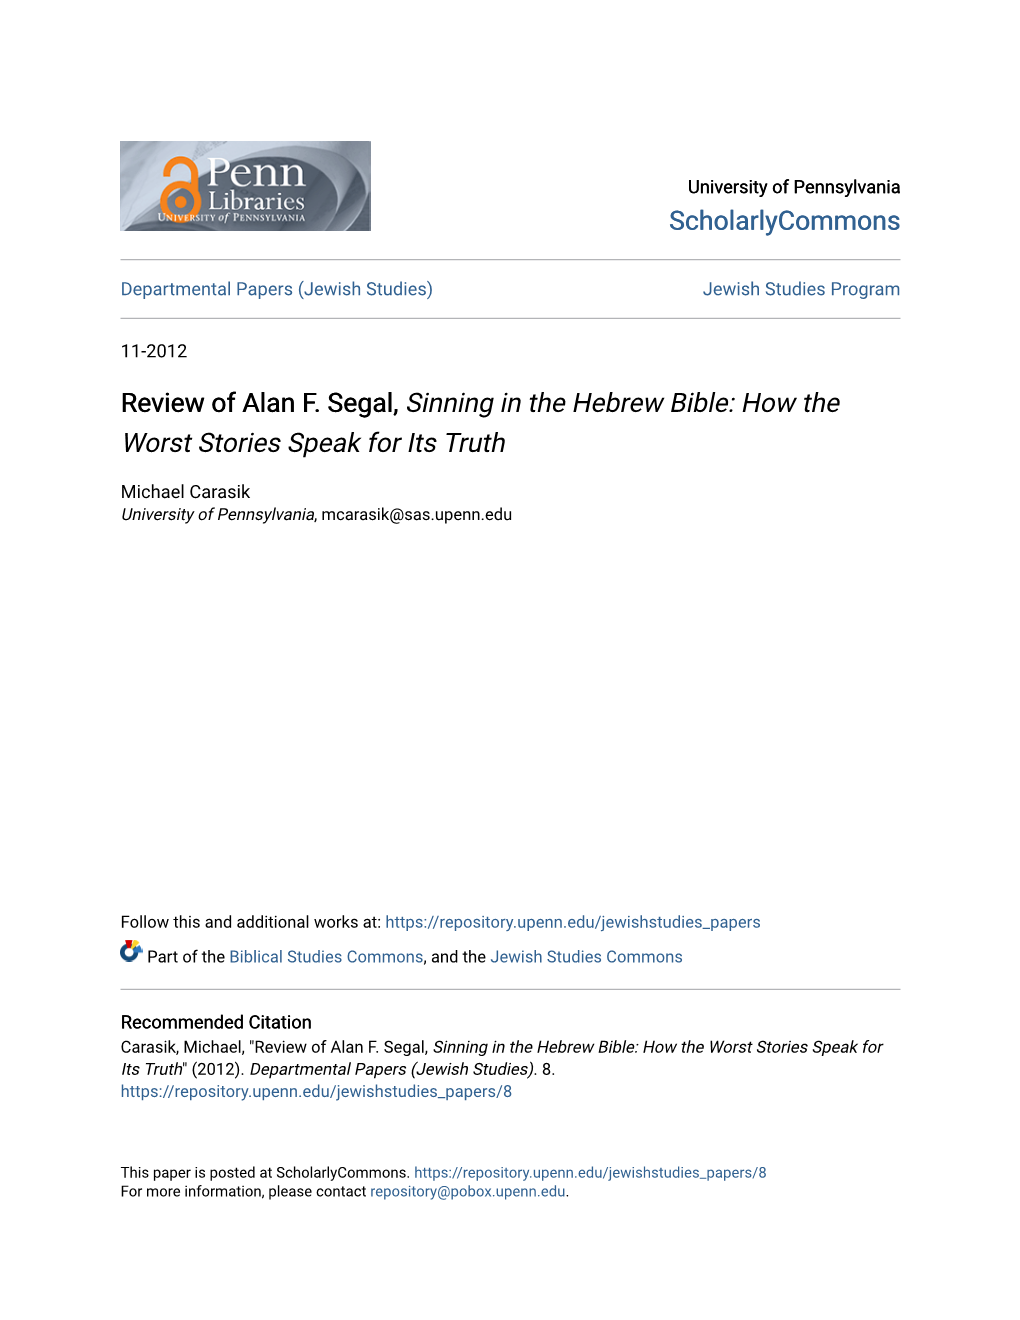 Review of Alan F. Segal, Sinning in the Hebrew Bible: How the Worst Stories Speak for Its Truth